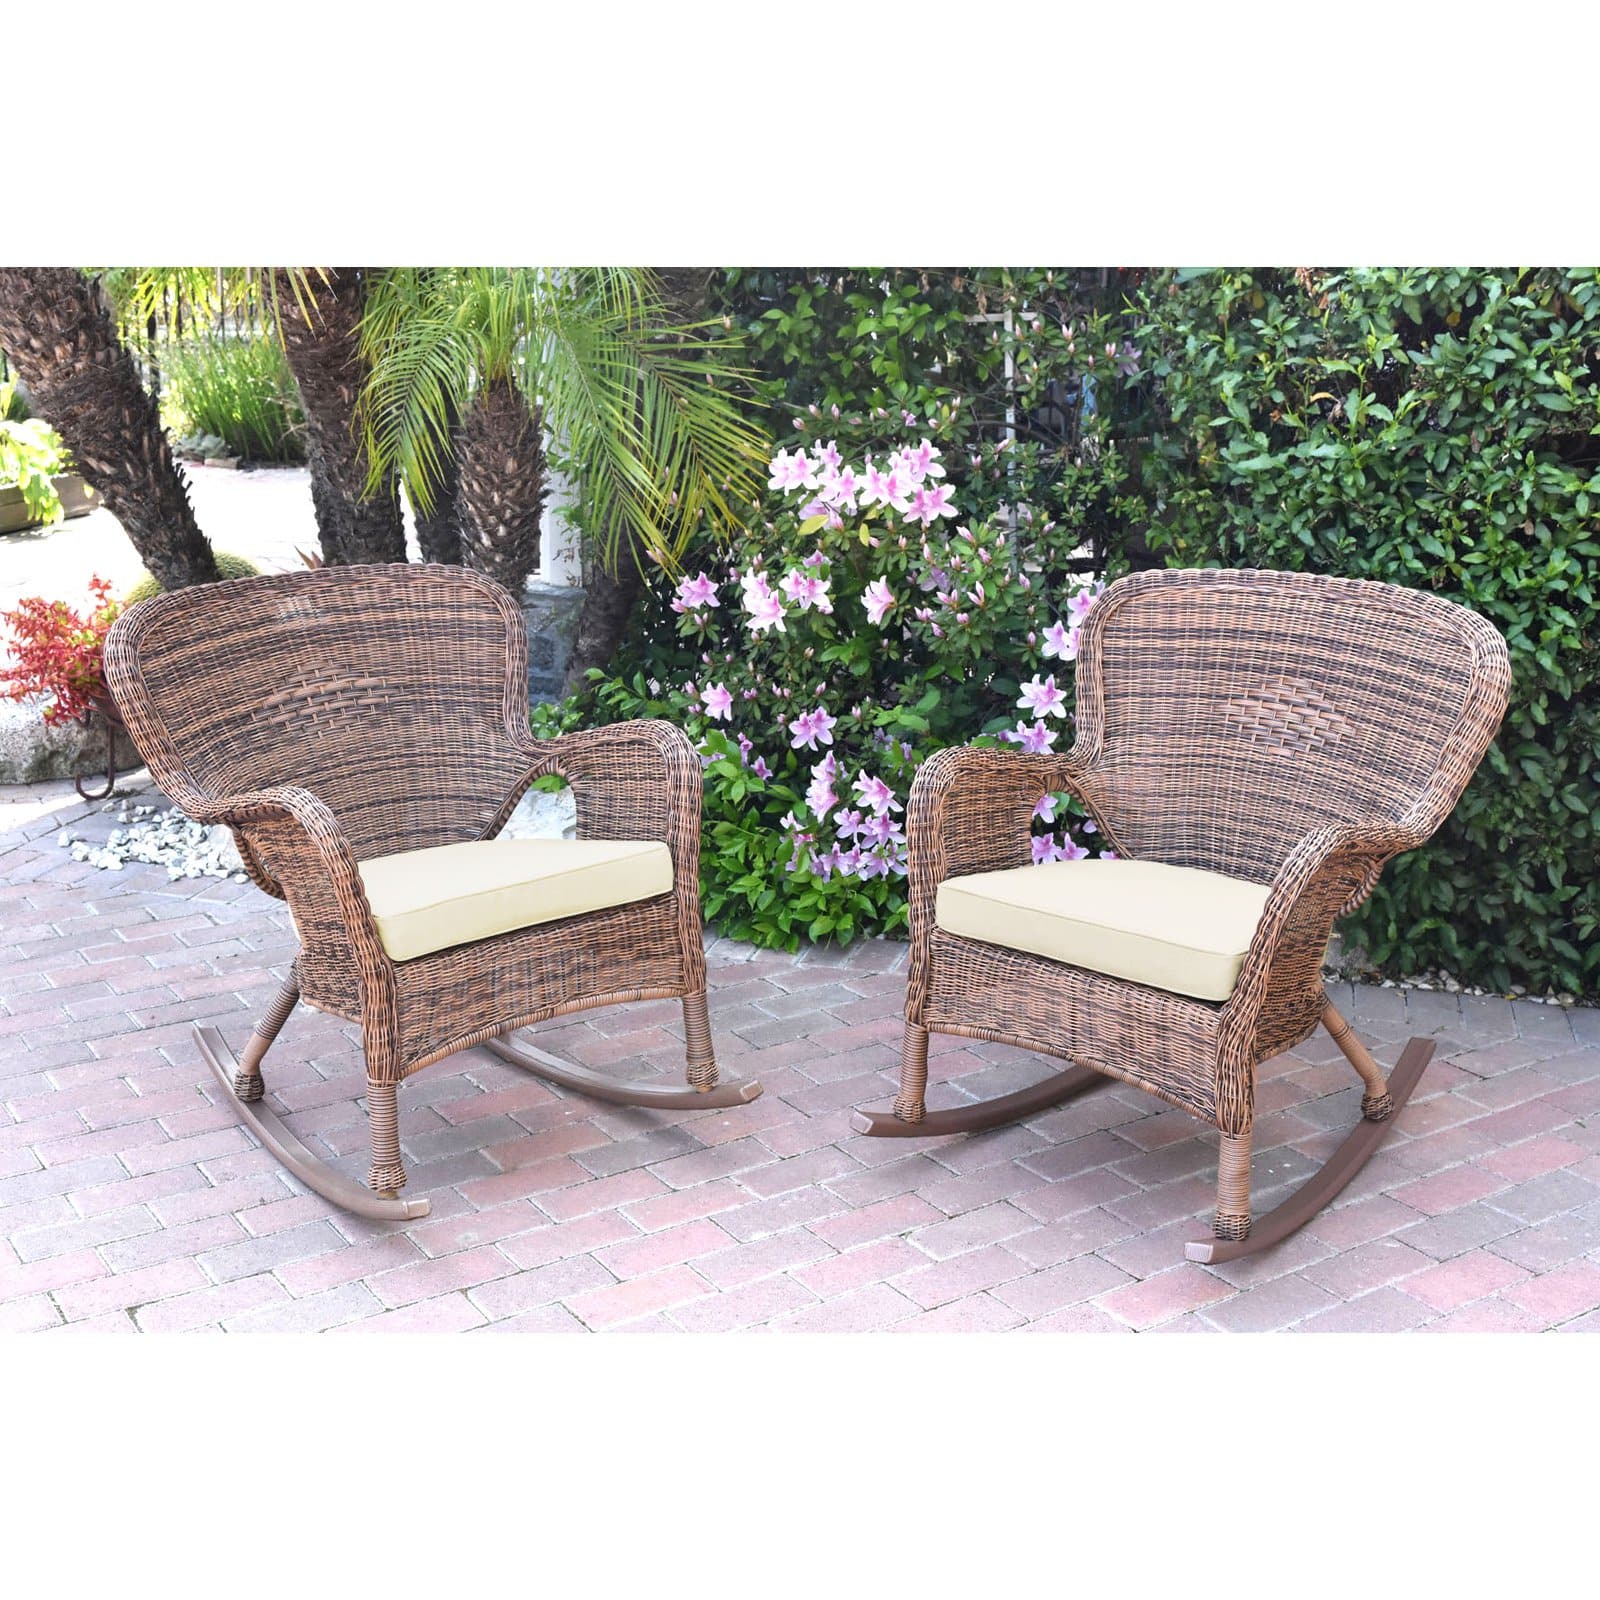 Jeco W00212-R-2-FS001 Windsor Honey Resin Wicker Rocker Chair with Ivory Cushions - Set of 2 - image 2 of 2